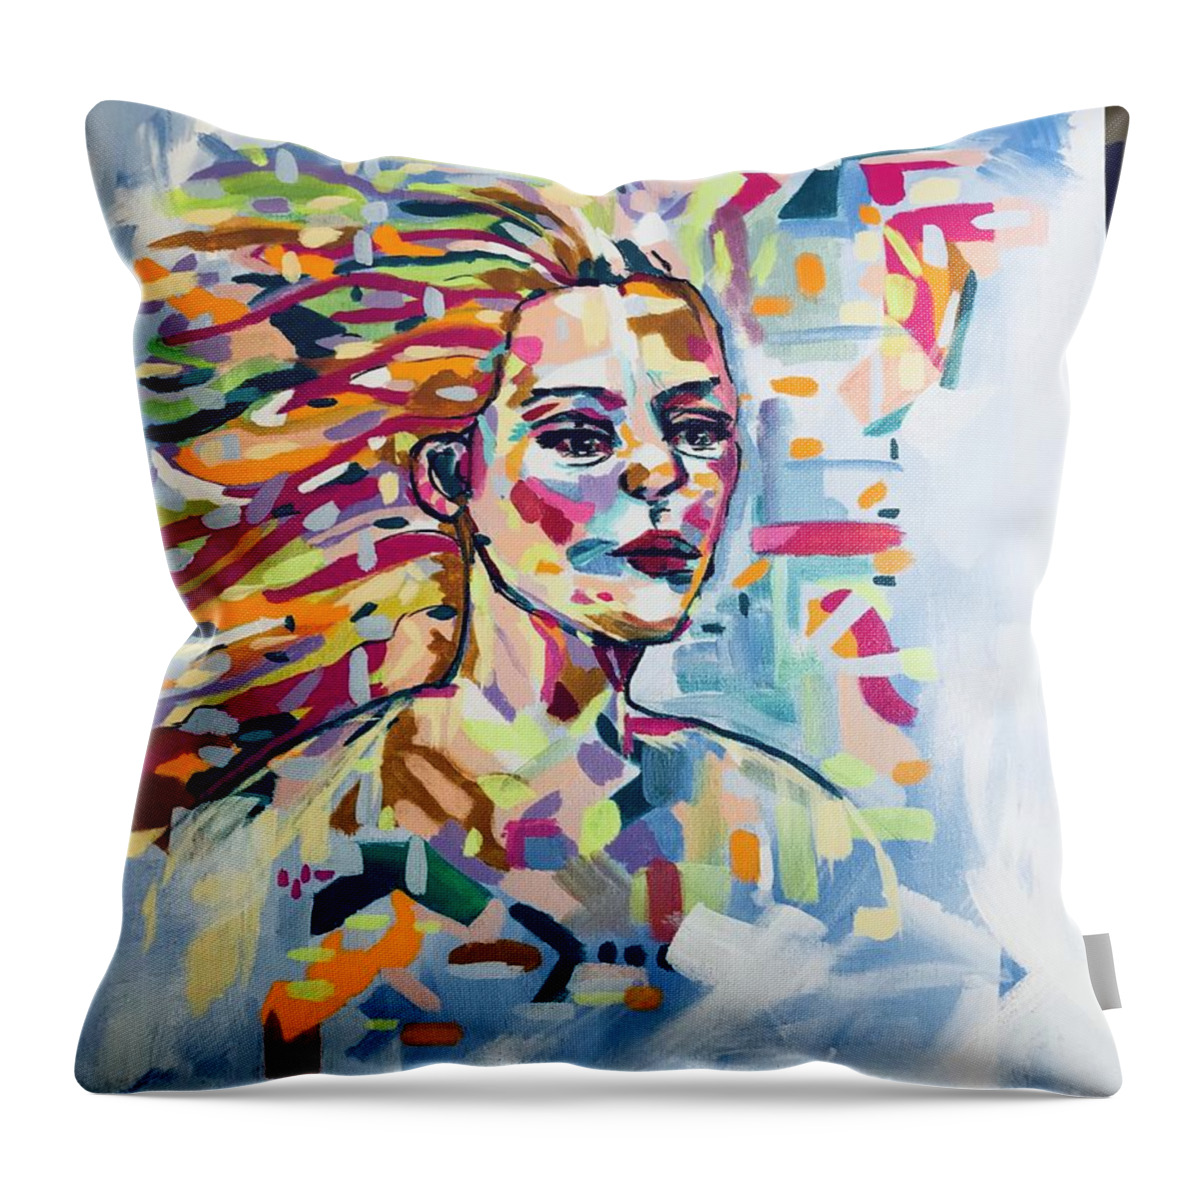 Original Art Work Throw Pillow featuring the painting Painted Lady #1 by Theresa Honeycheck